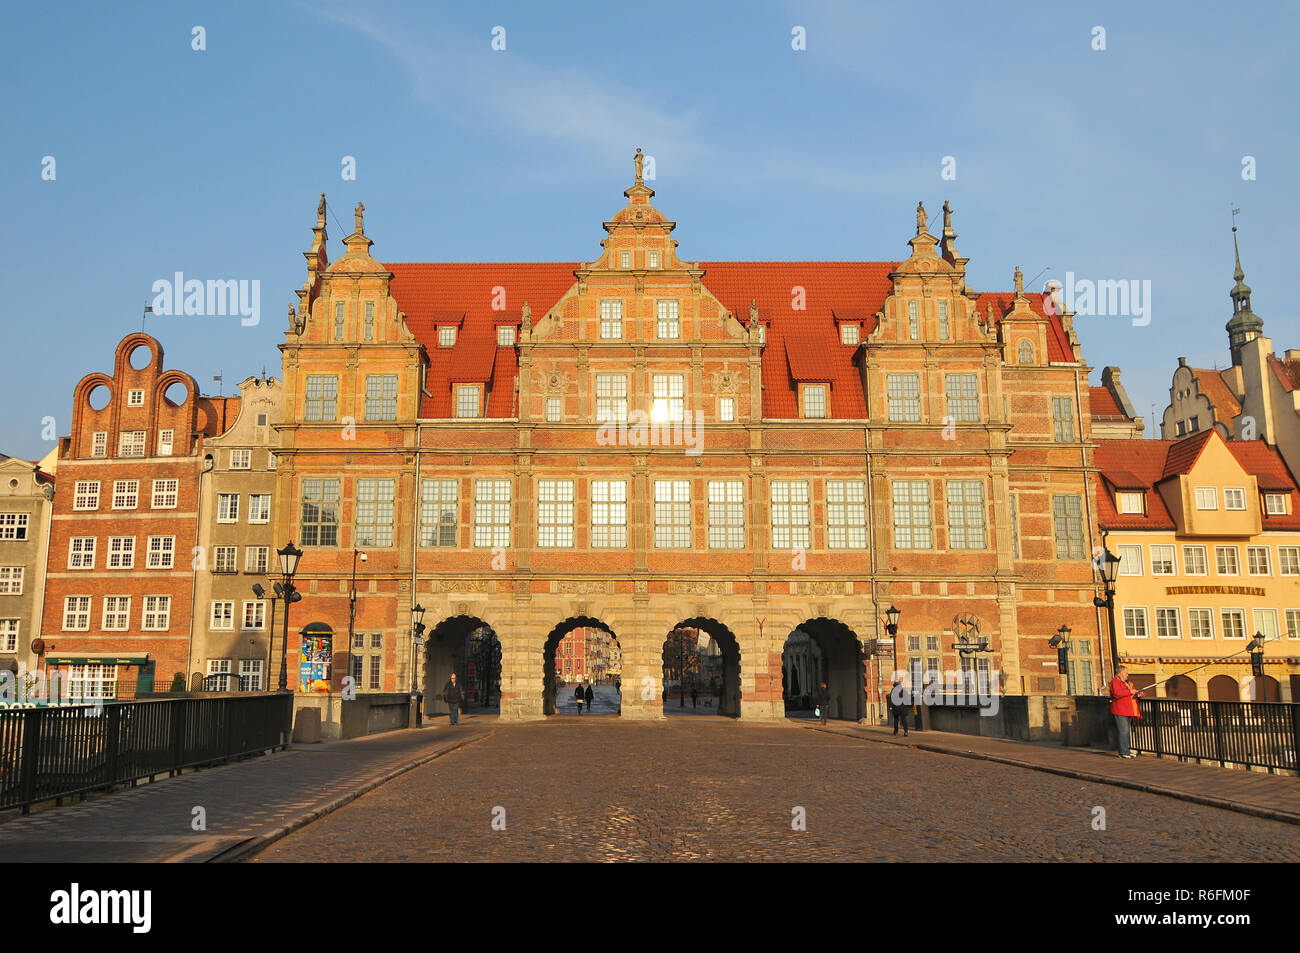 Green Gate Seen From Green Bridge On Old Town Of Gdansk, Poland Stock Photo  - Alamy